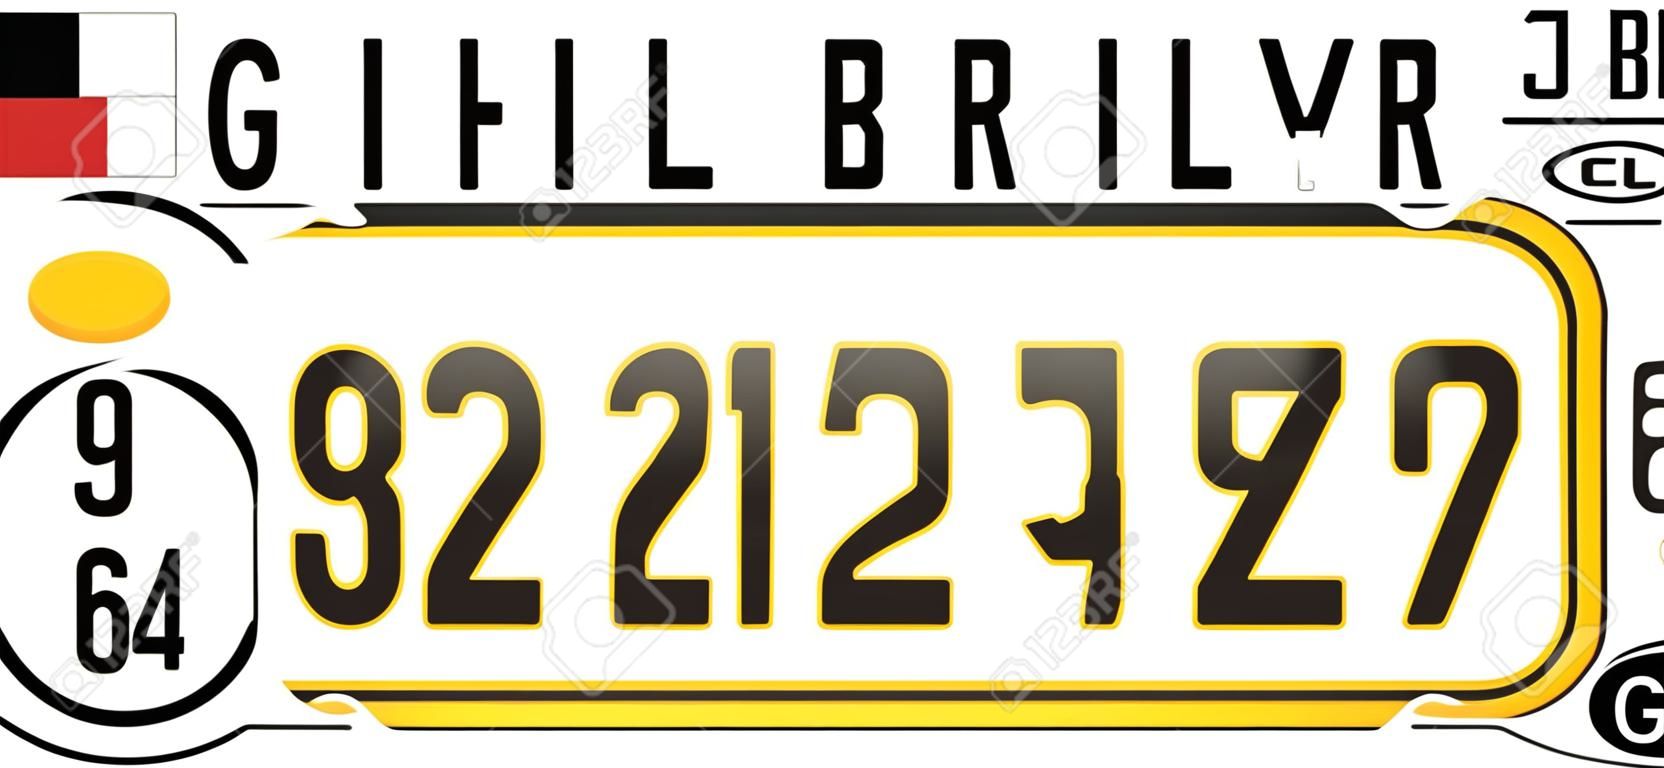 Gibraltar car license plate, letters, numbers and symbols, Europe